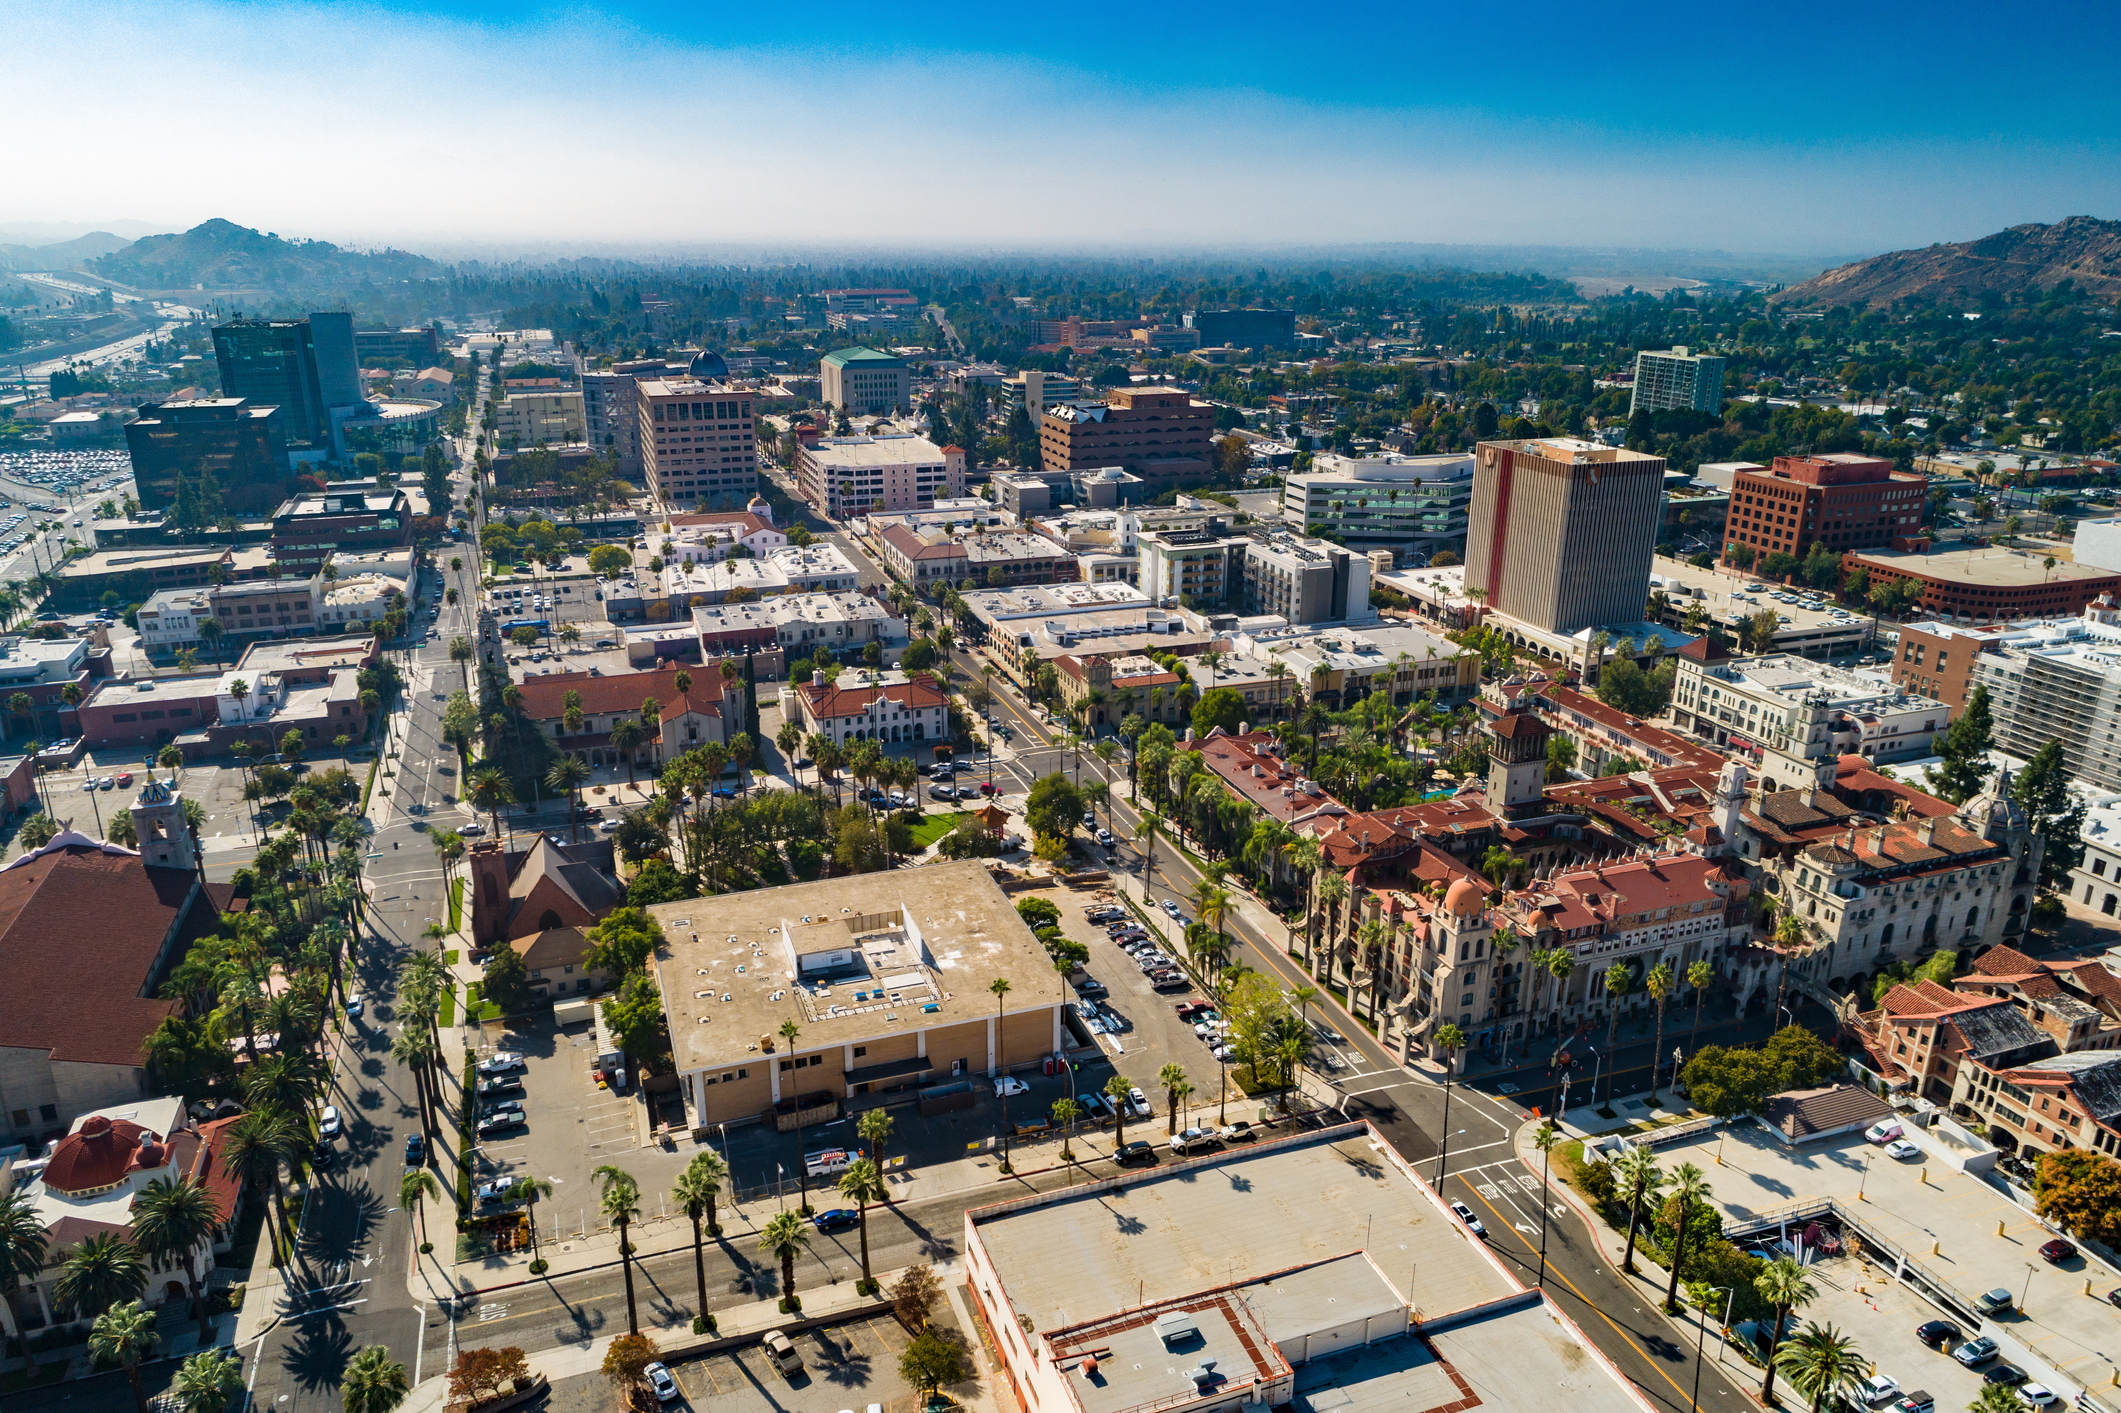 Downtown Riverside Commercial Real Estate